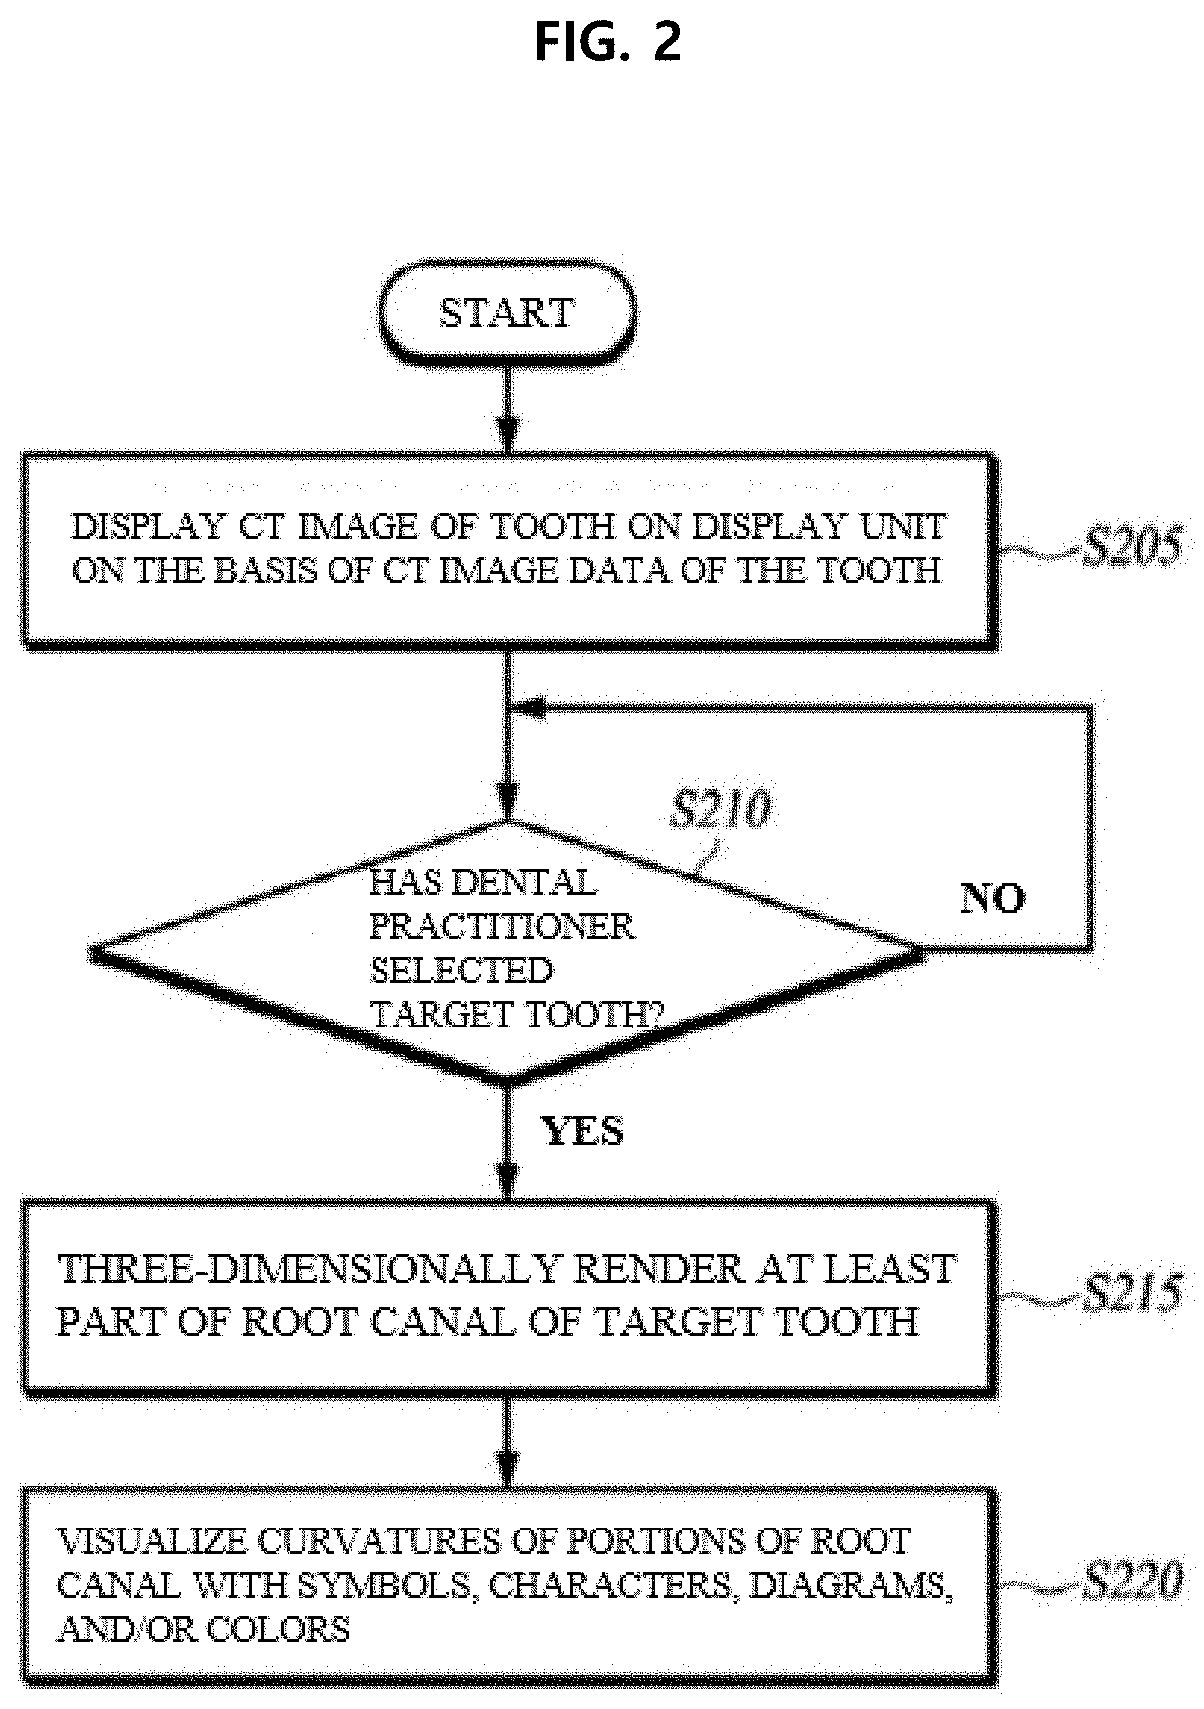 Method and apparatus for three-dimensionally visualizing root canal curvature of tooth